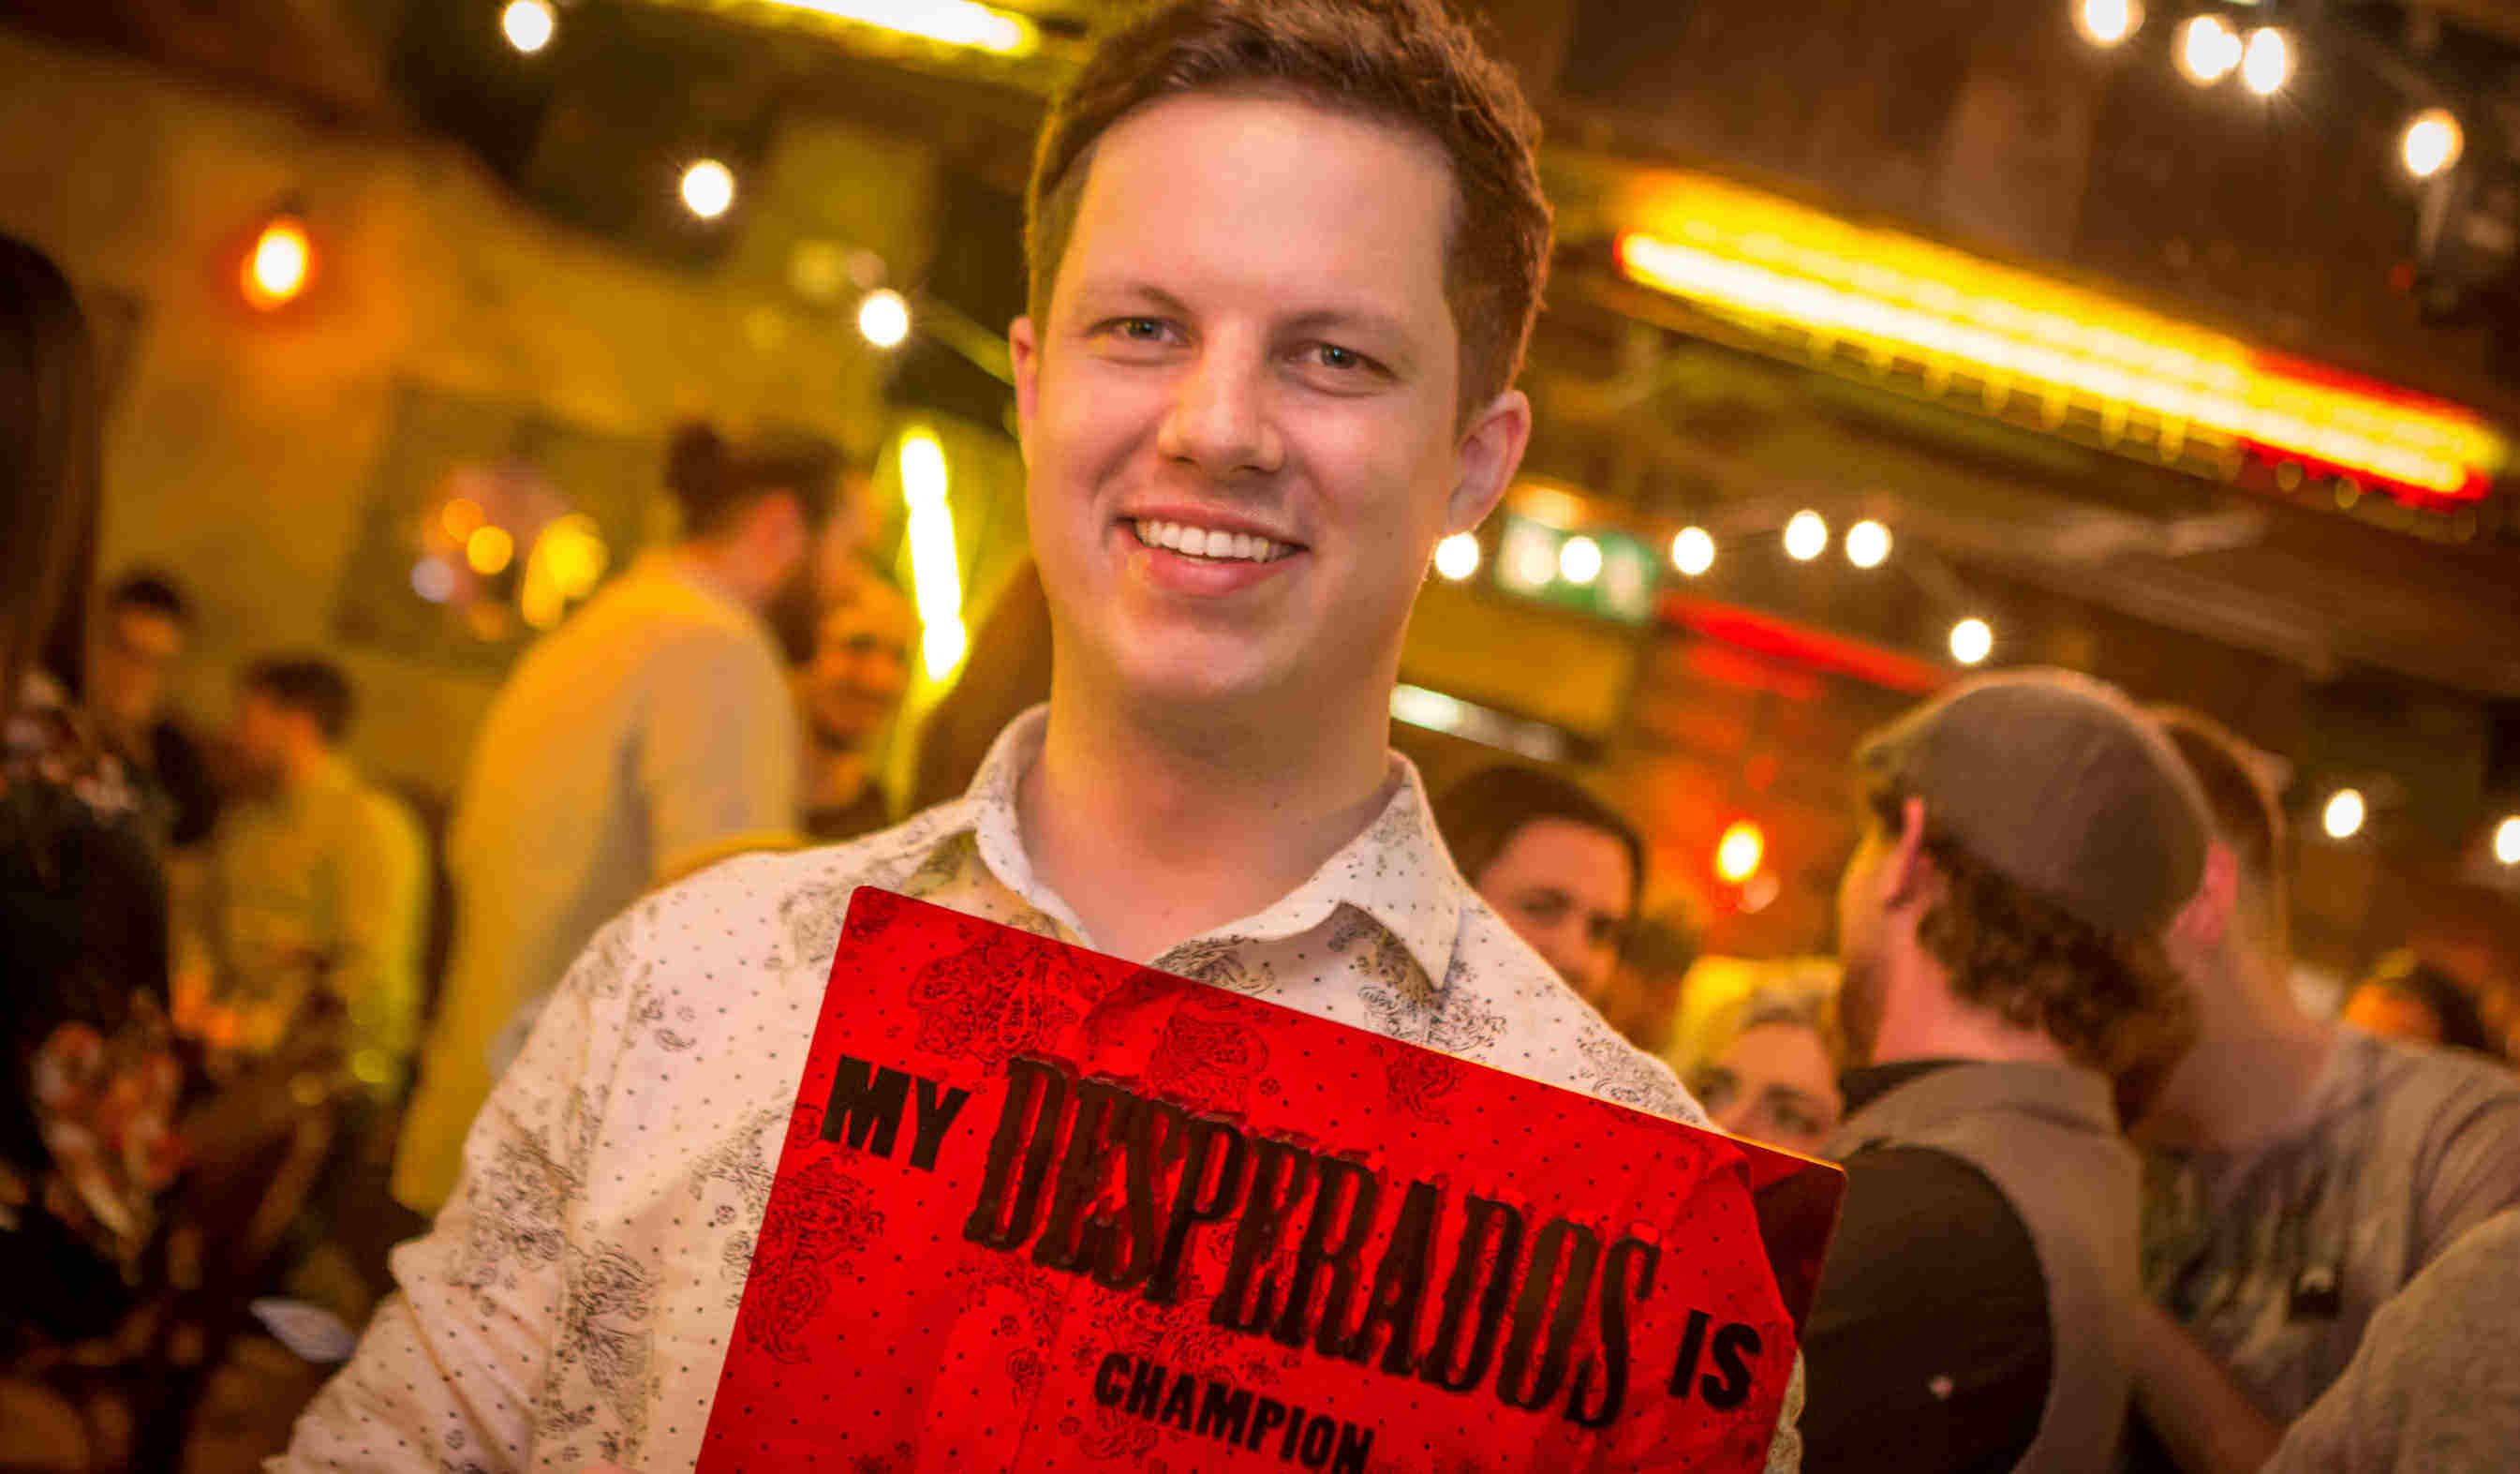 Stefan Nolan of SoHo Bar & Restaurant in Cork was crowned winner of the nationwide ‘My Desperados Is…’ competition held in Dublin’s Xico bar recently.